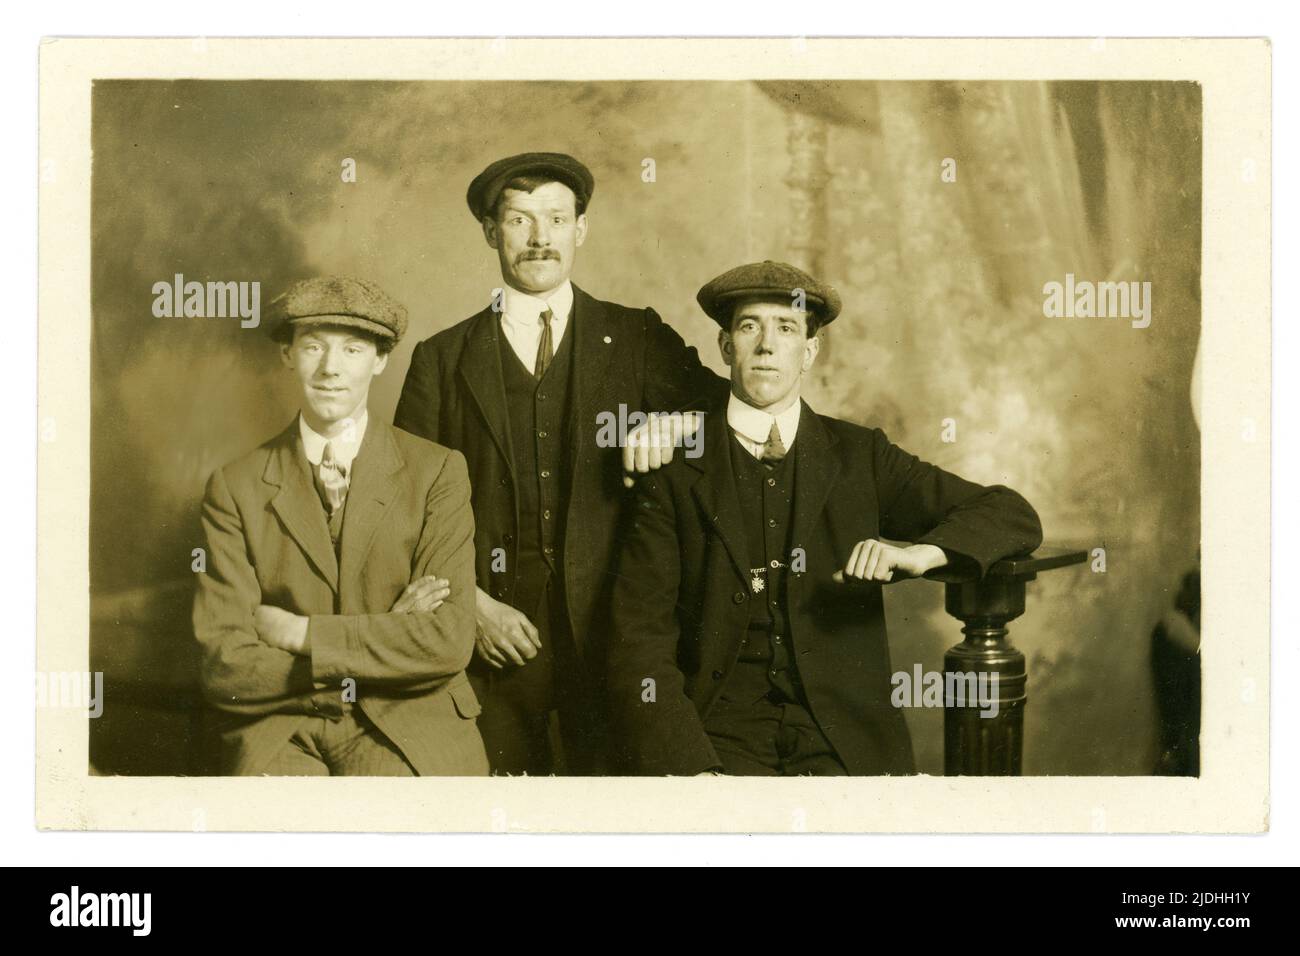 Original and clear early 1900's studio portrait group of 3 working class men wearing flat caps, possibly a WW1 enlistment photograph of friends, studio of Photographer, Cuttriss, Neville Street, Newcastle-on-Tyne, U.K.   circa  1914-1919, Stock Photo